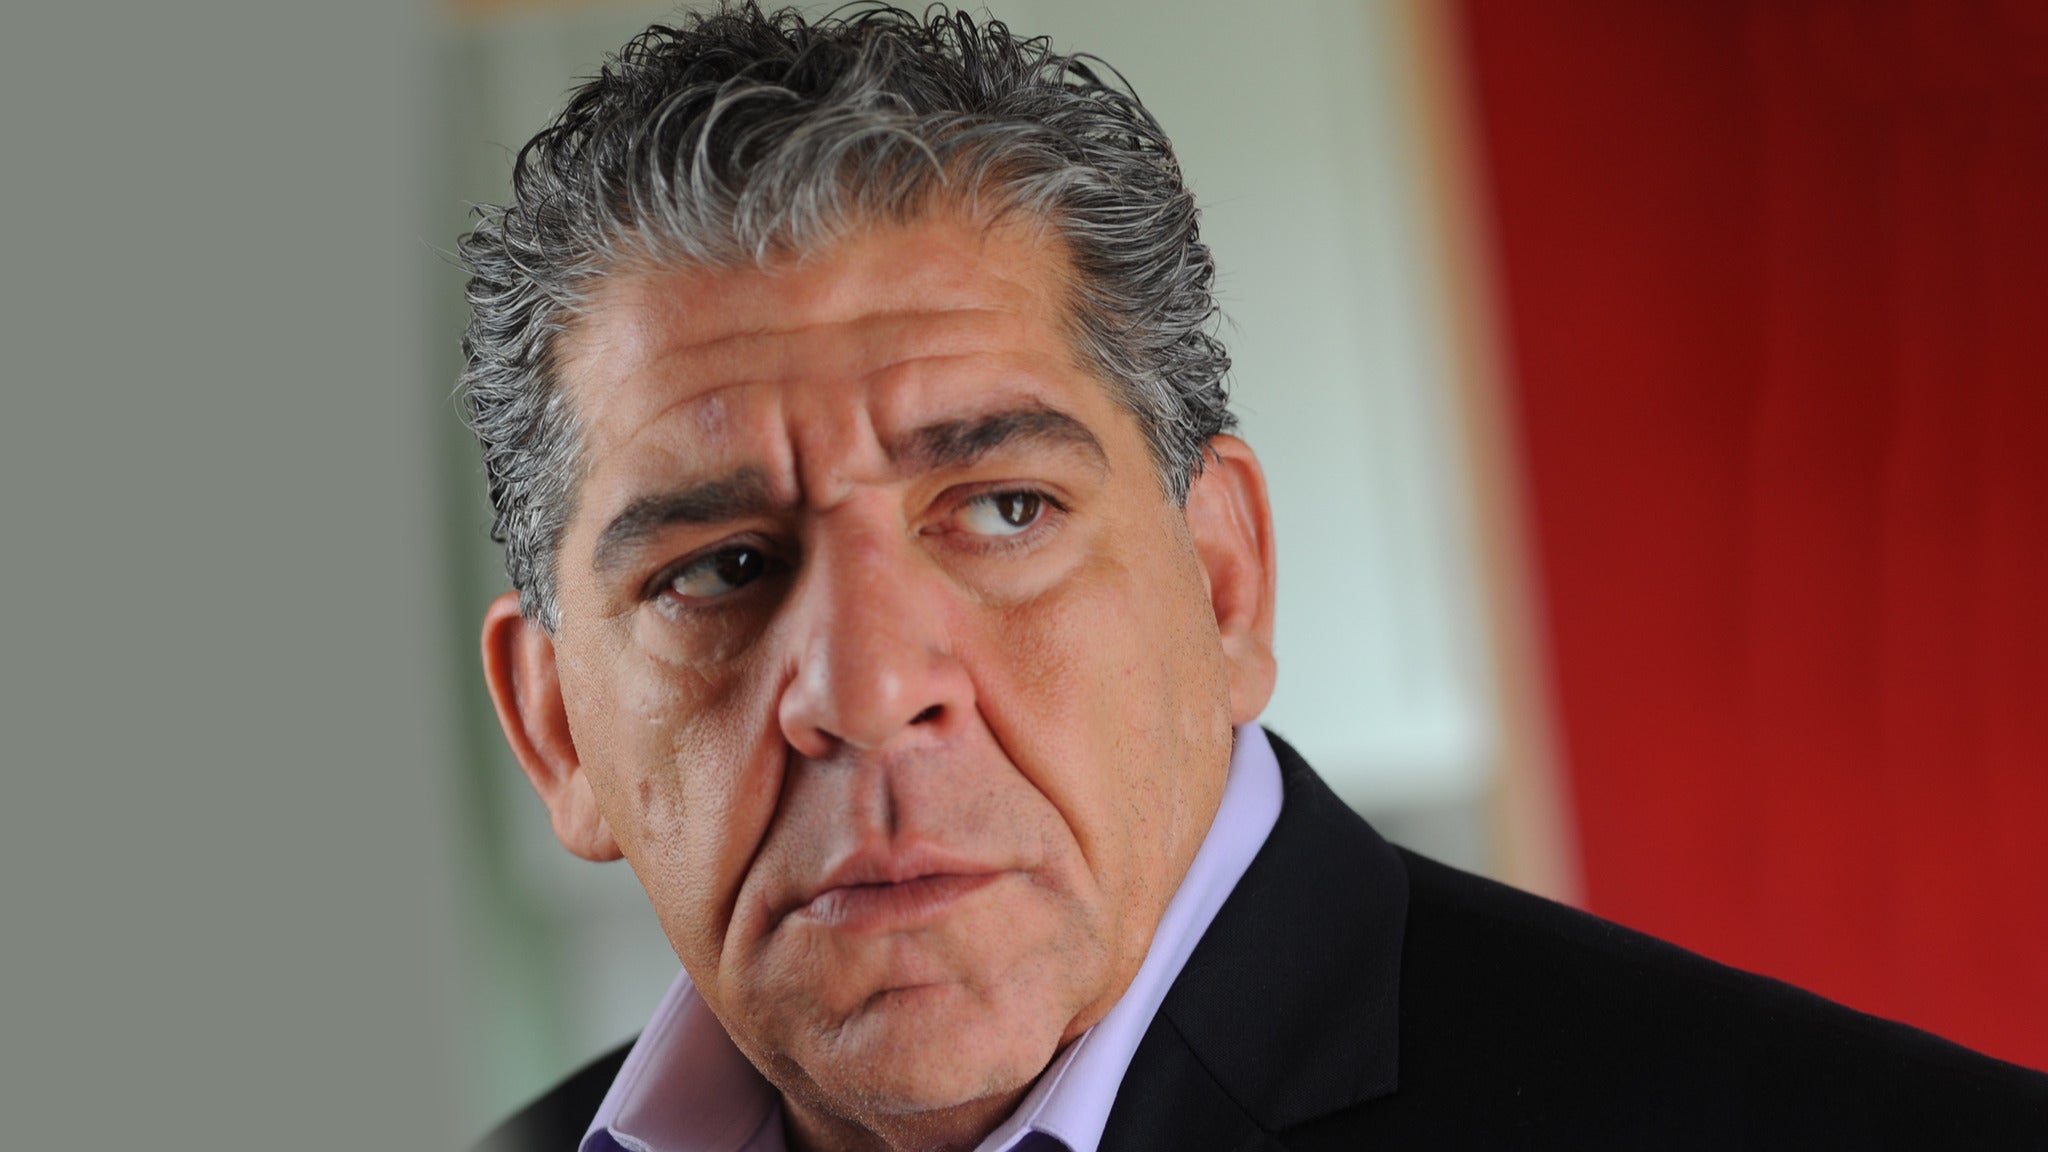 Joey Diaz: The 56 and Still Slinging Dick Tour in New York event information